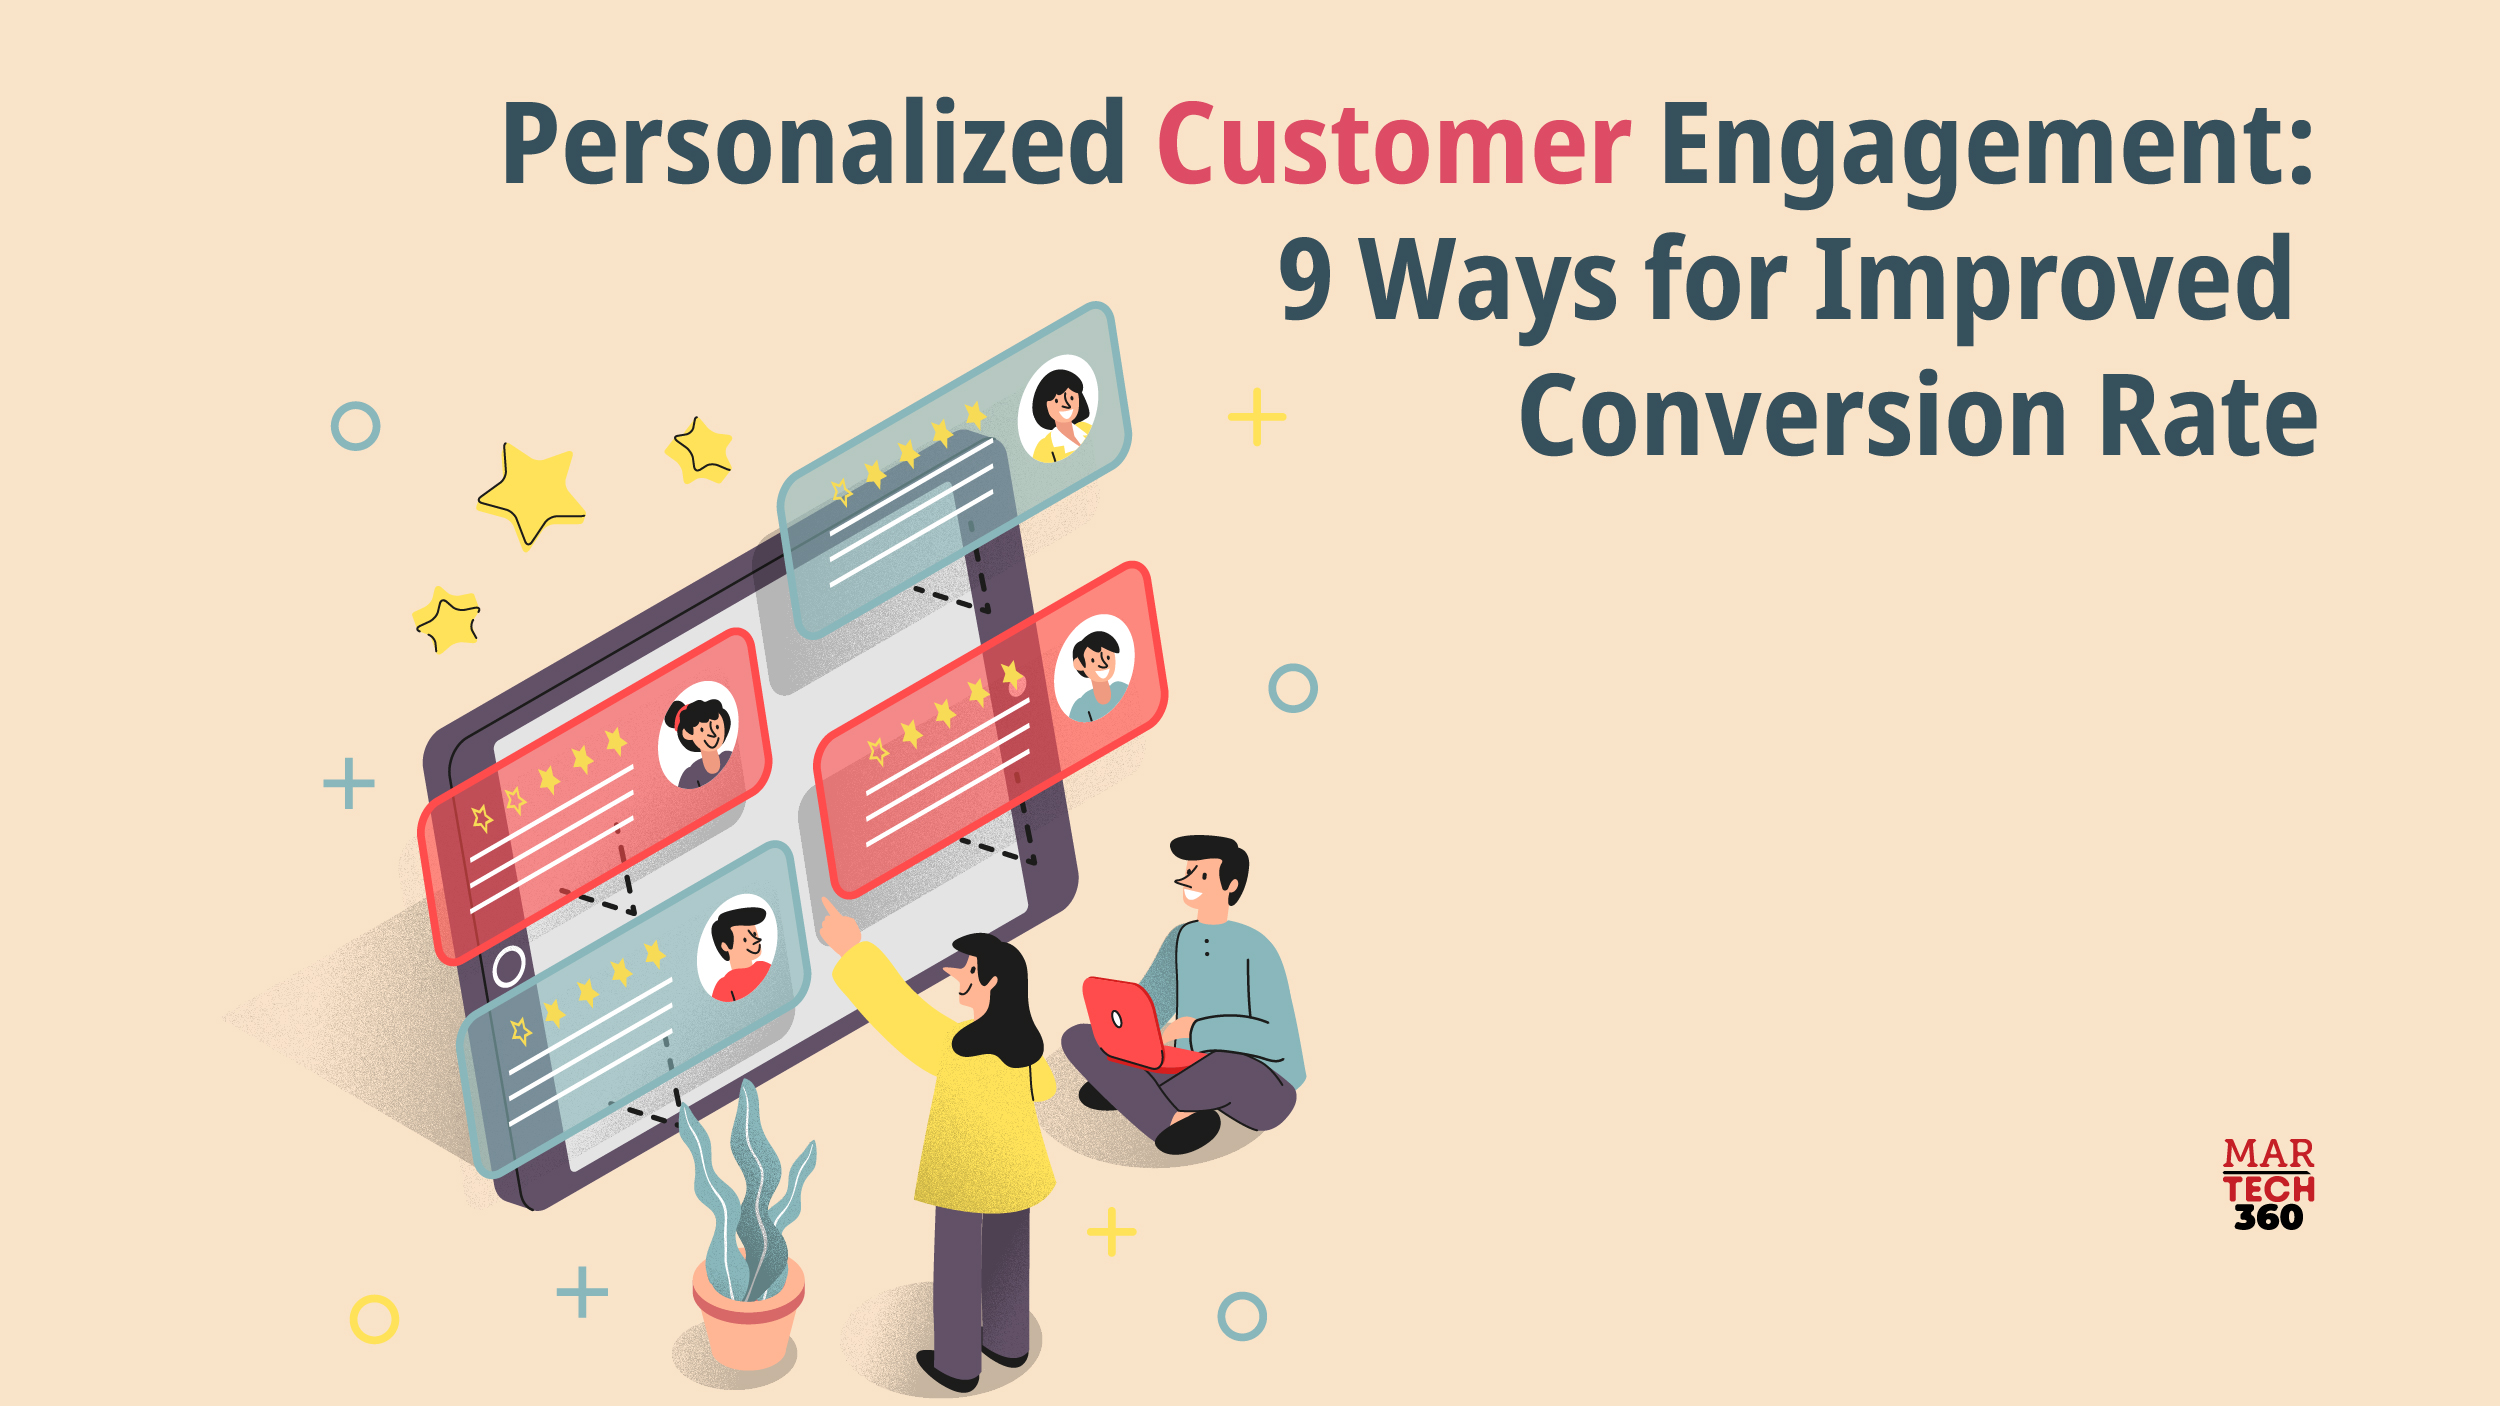 Personalized Customer Engagement: 9 Ways for Improved Conversion Rate